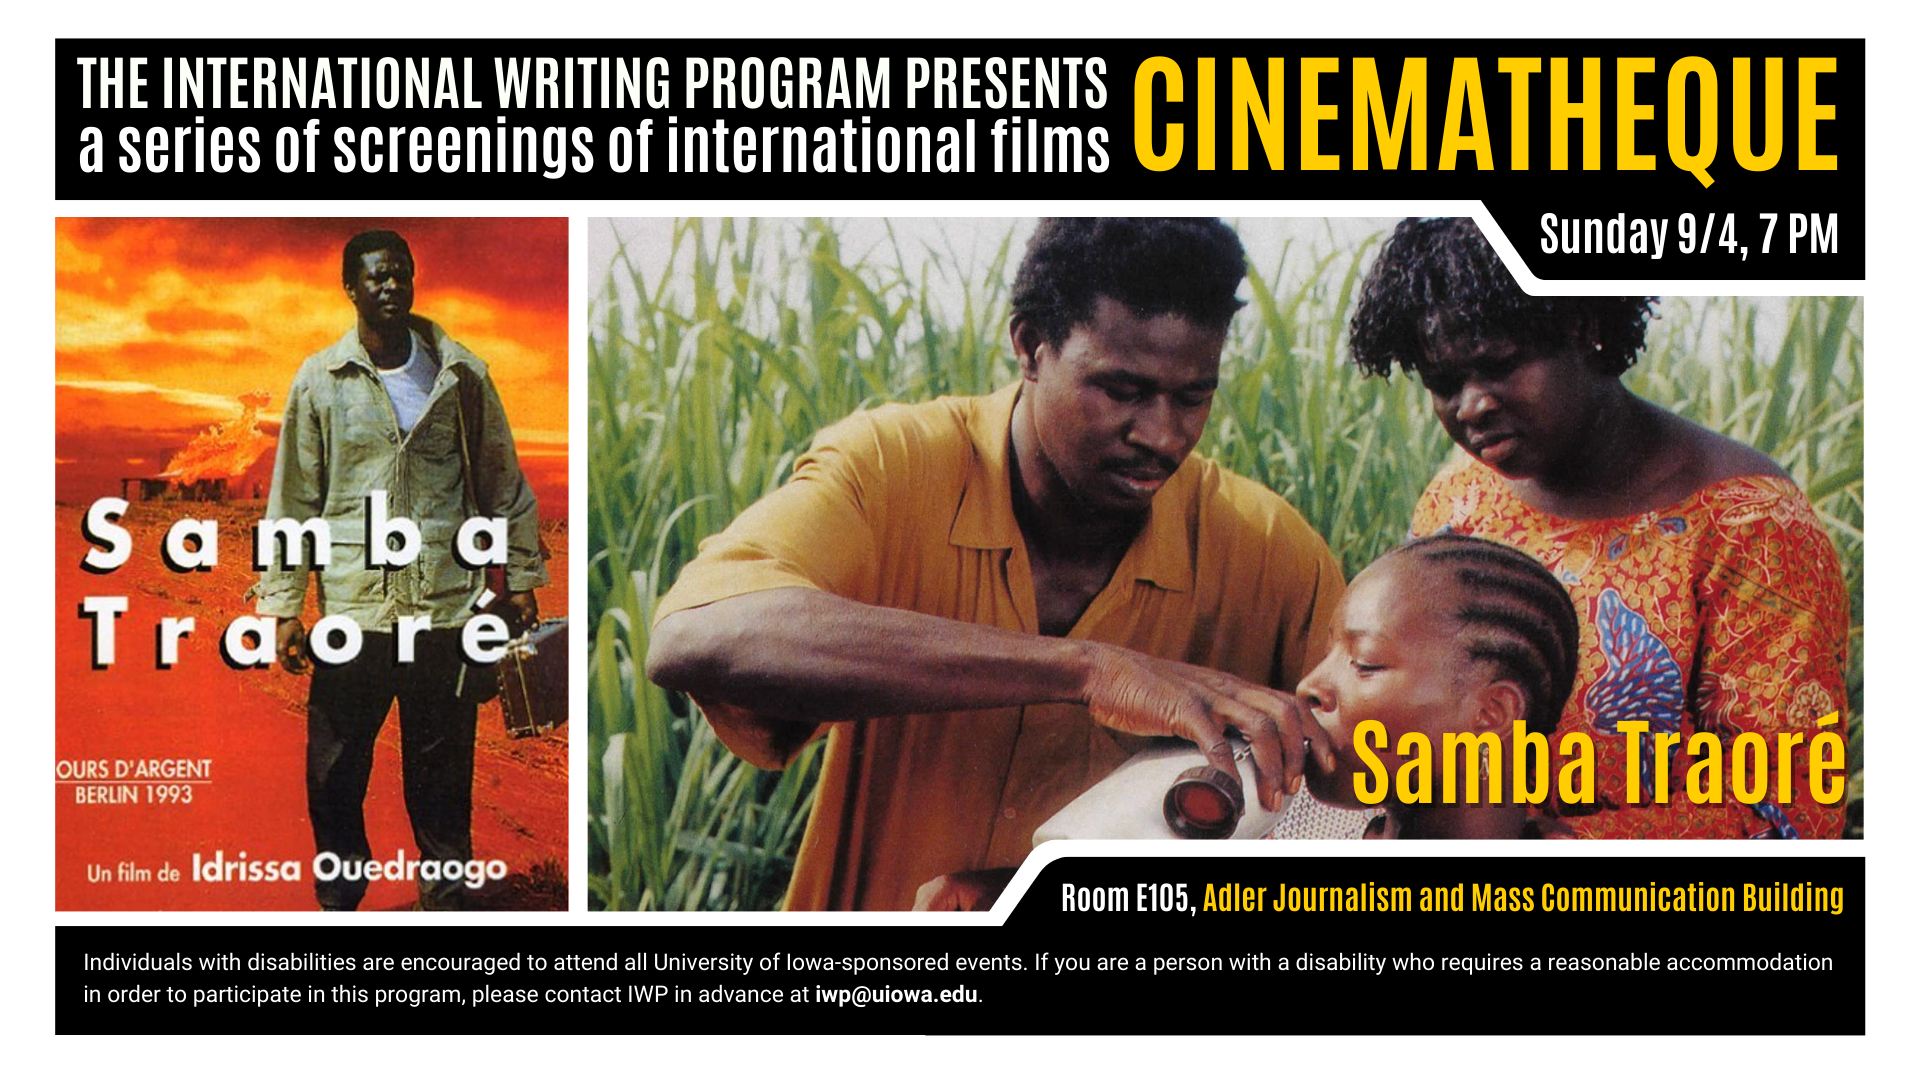 The International Writing Program presents a series of screenings of international films. Cinematheque. Sunday, August 4th at 7pm. "Samba Traore" Un film de Idrissa Ouedraogo. Room E105, Adler Journalism and Mass Communication Building. Individuals with disabilities are encouraged to attend all University of Iowa-sponsored events. If you are a person with a disability who requires a reasonable accommodation in order to participate in this program, please contact IWP in advance at iwp@uiowa.edu. 